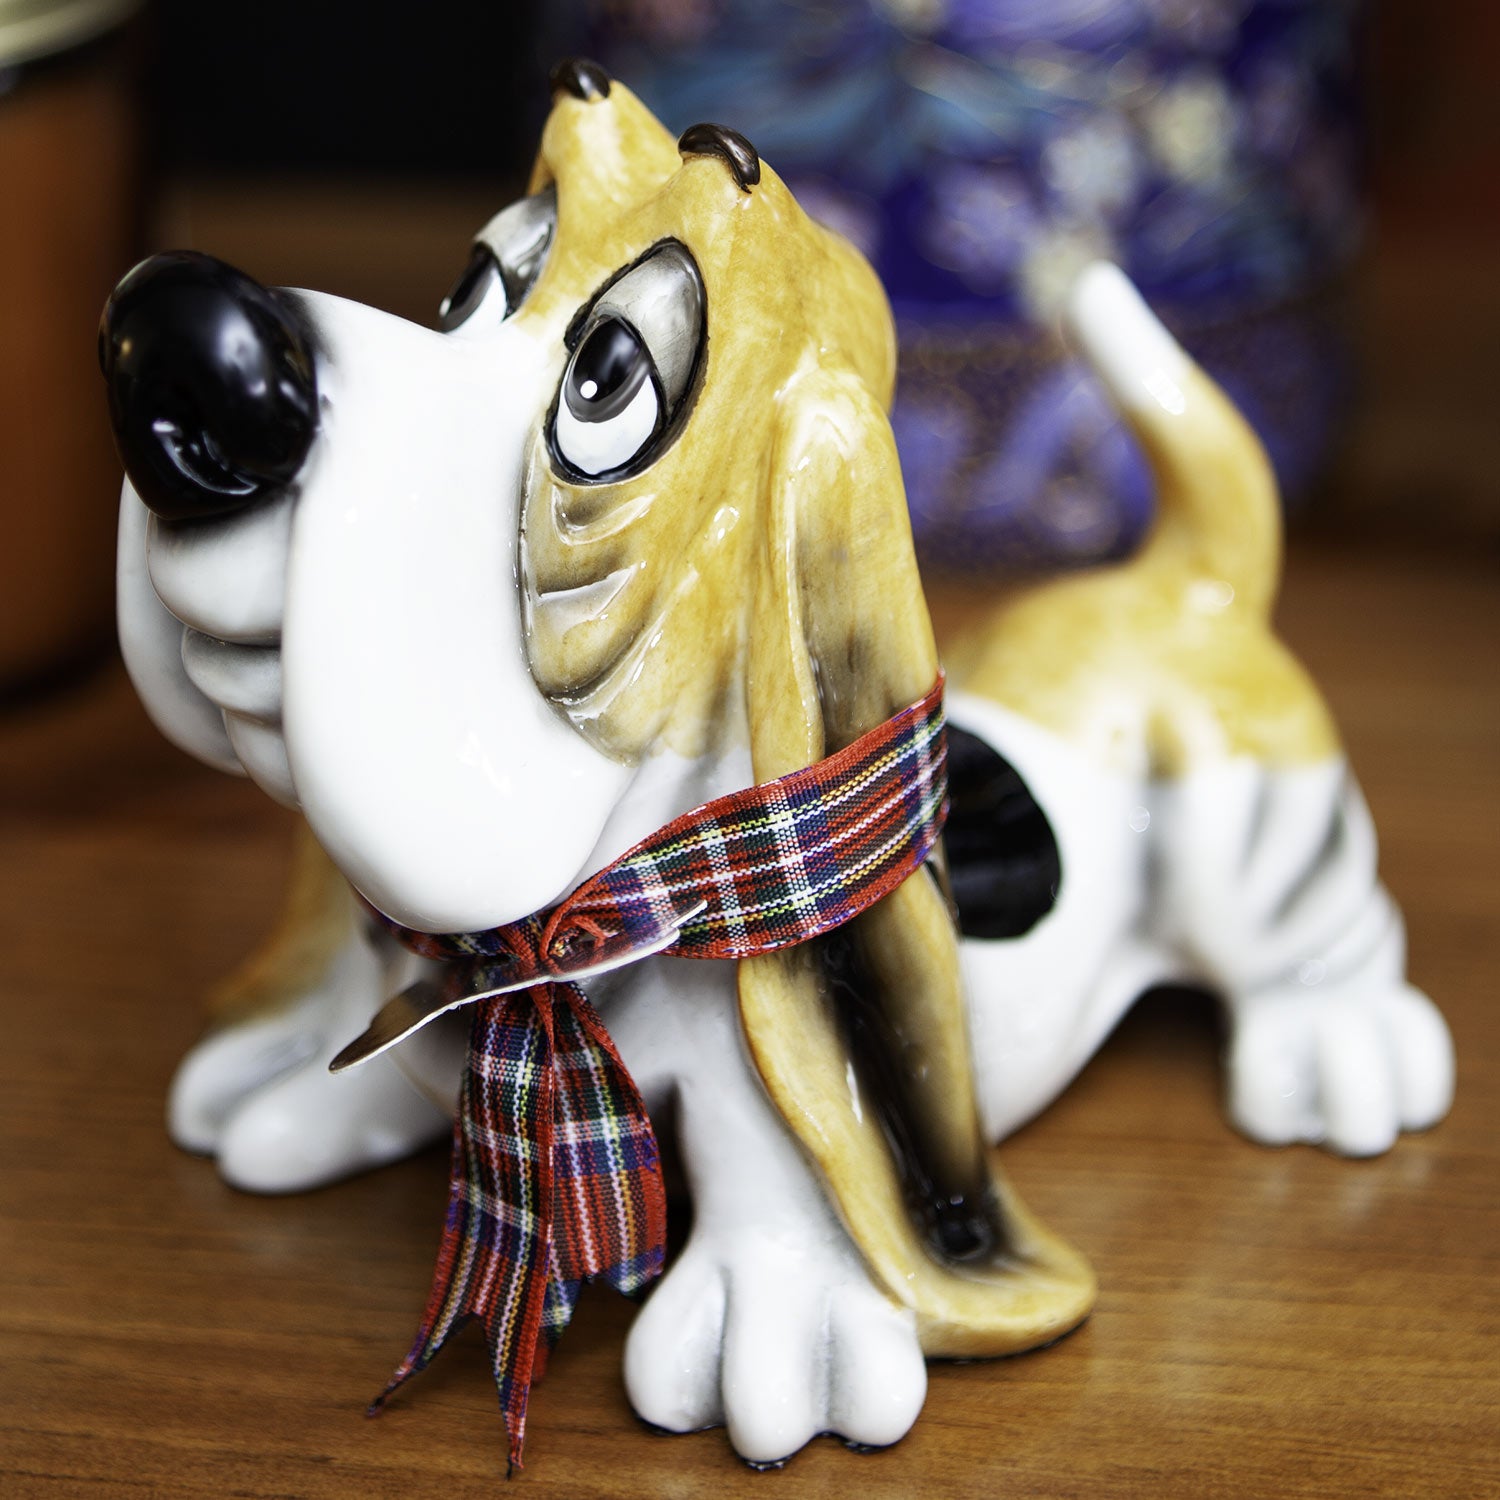 Dog Lover Gifts available at Dog Krazy Gifts - Bridget The Basset Hound - part of the Little Paws range available from DogKrazyGifts.co.uk